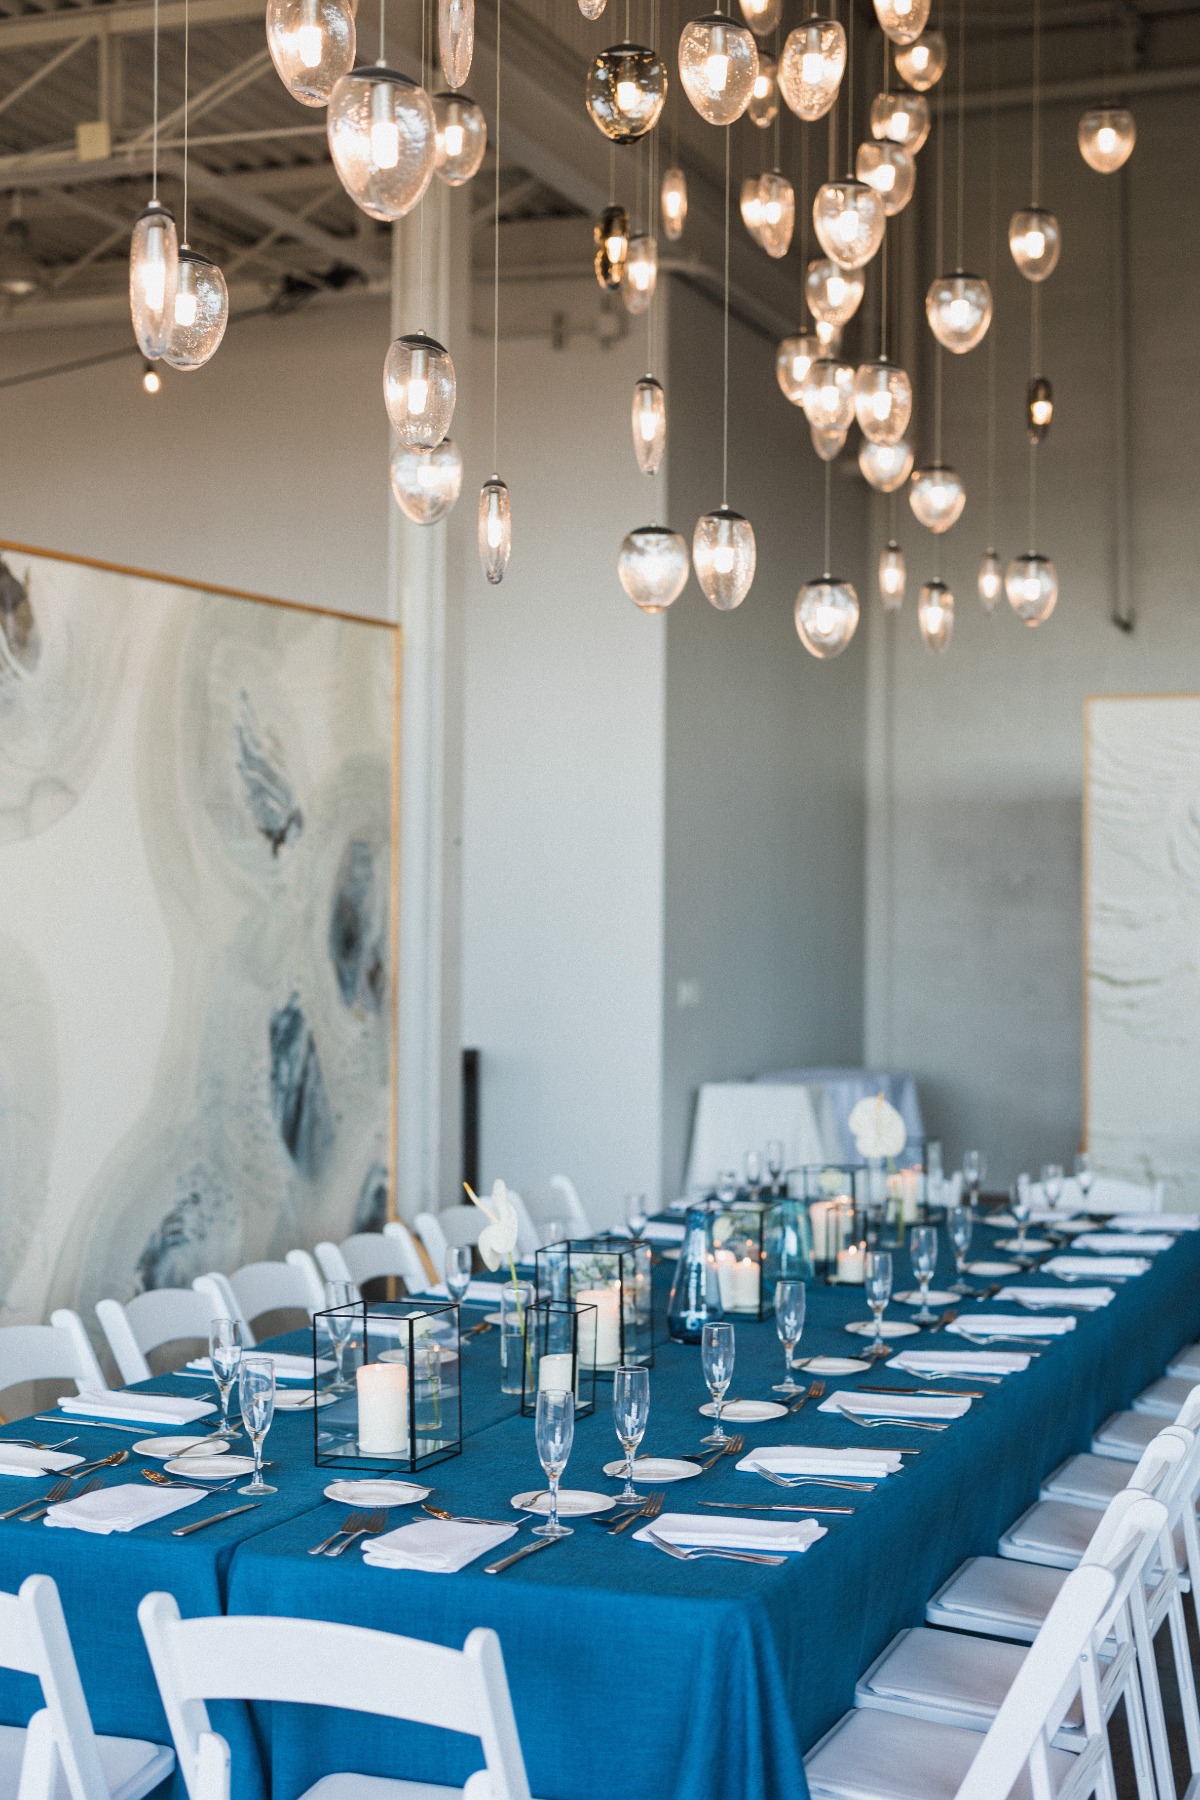 Modern Art May Be Our New Favorite Ceremony Backdrop